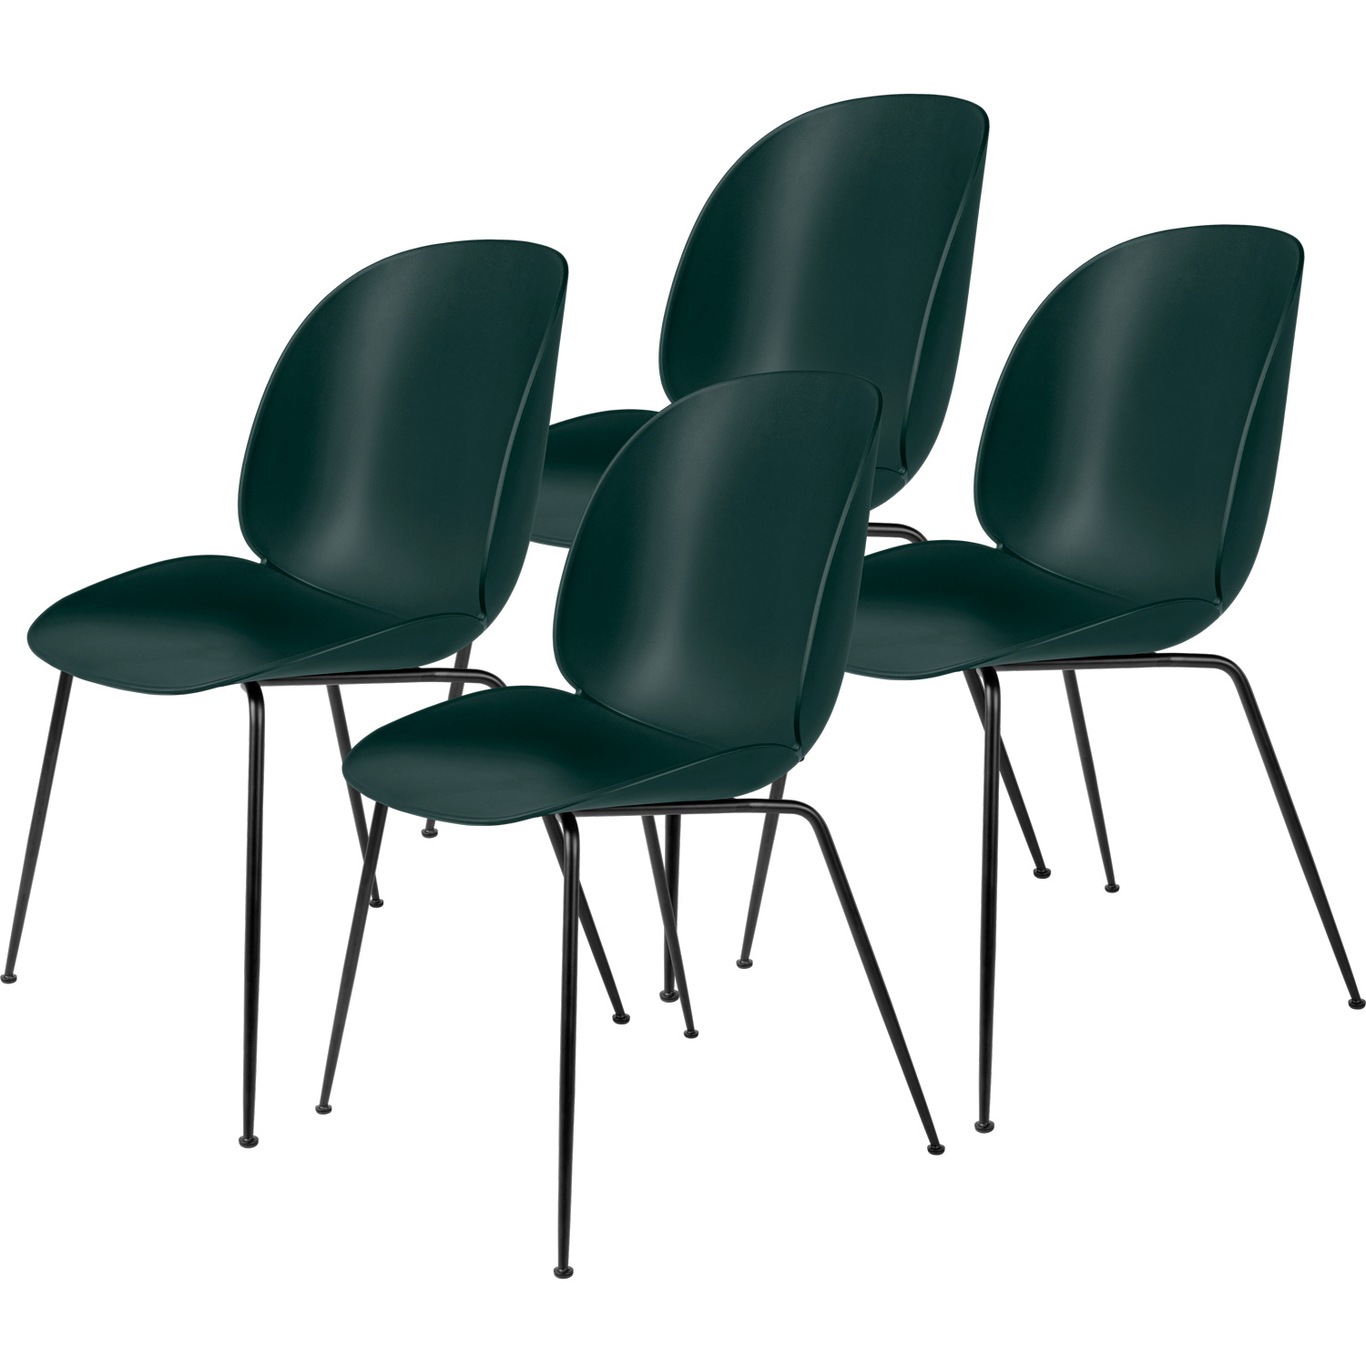 Beetle Dining Chair Unupholstered, Conic Base Black, Set Of 4, Green